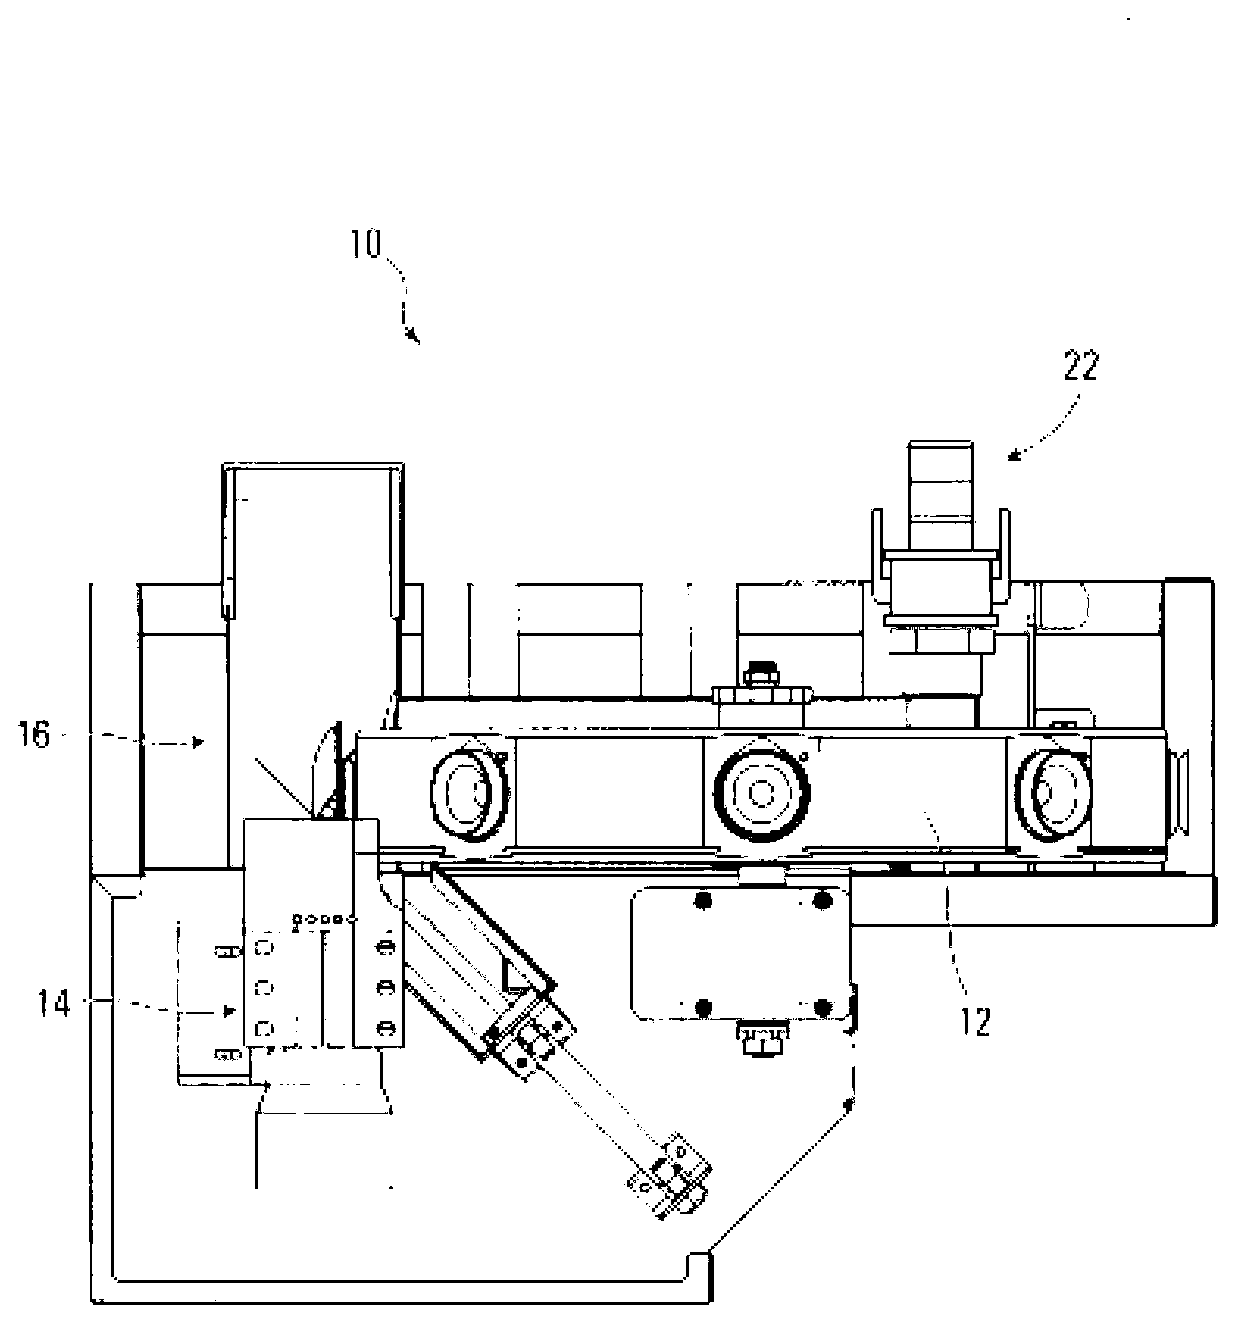 Mollusc processing apparatus and related methods